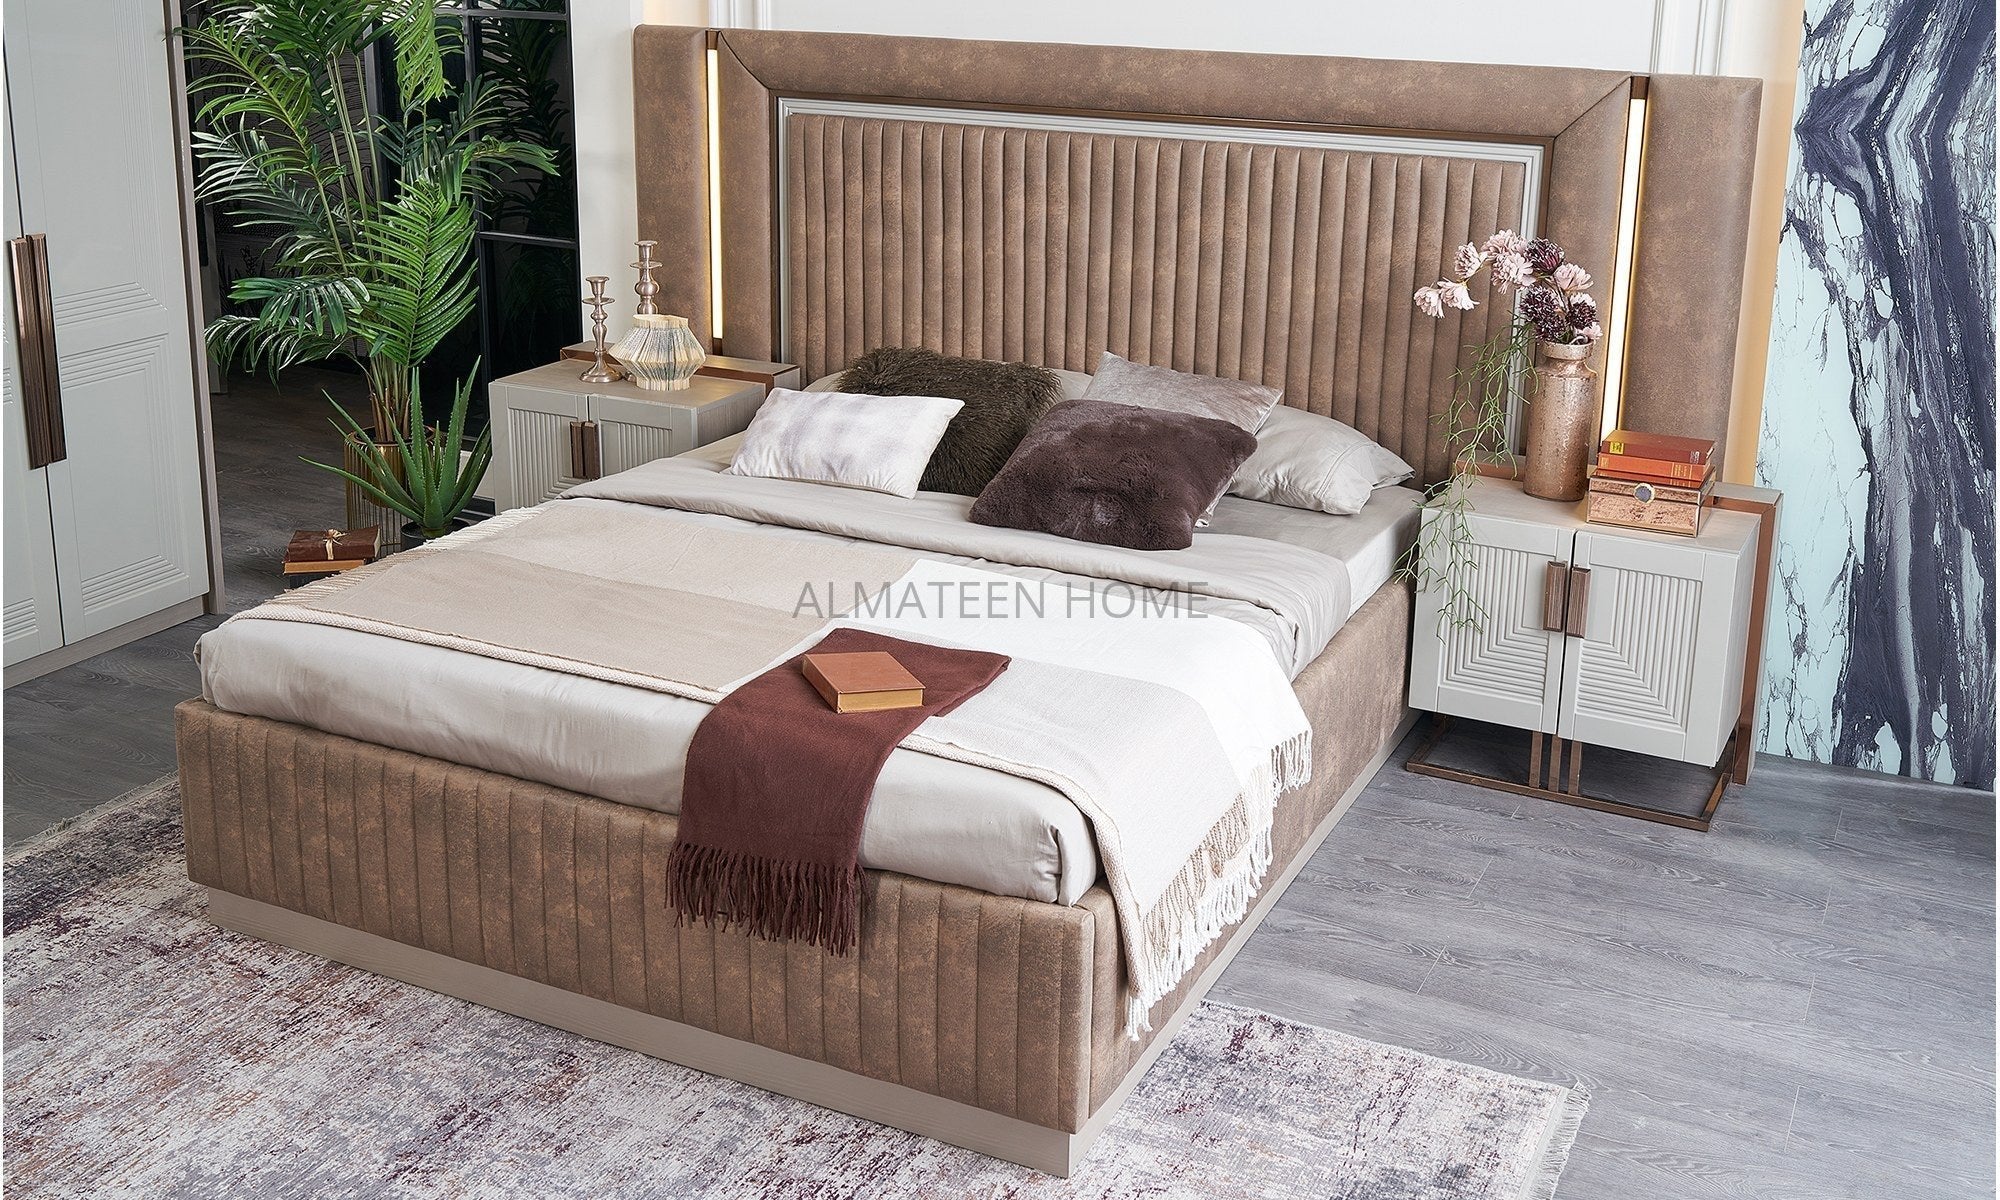 turkish-moon-bedroom-set-with-king-size-bed-dresser-wardrobe-and-side-tables-7- AL-Mateen Home